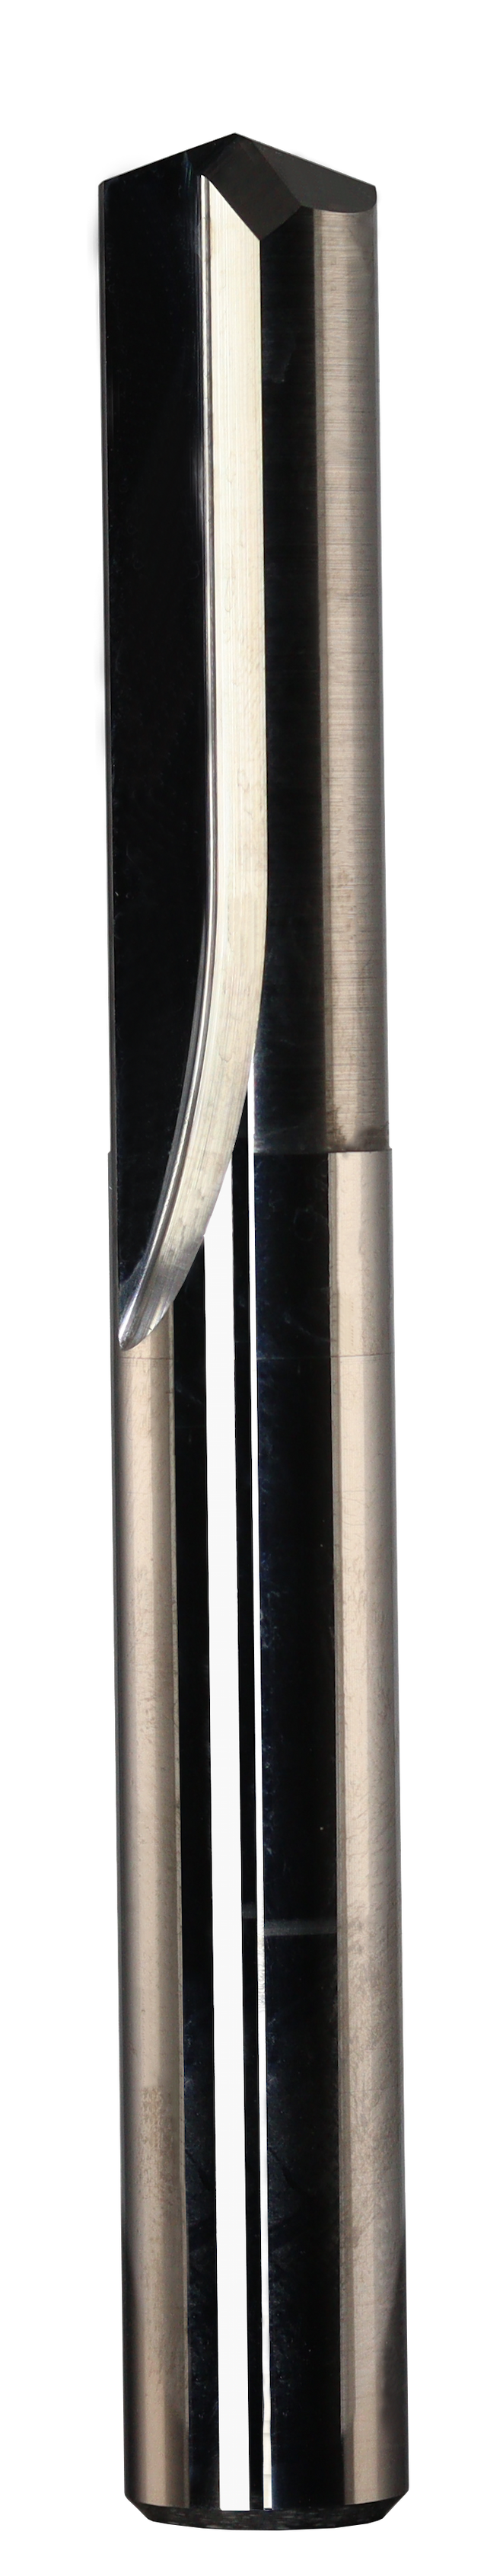 9.00mm Dia, 140 Degree Point, Solid Carbide Drill - 66031